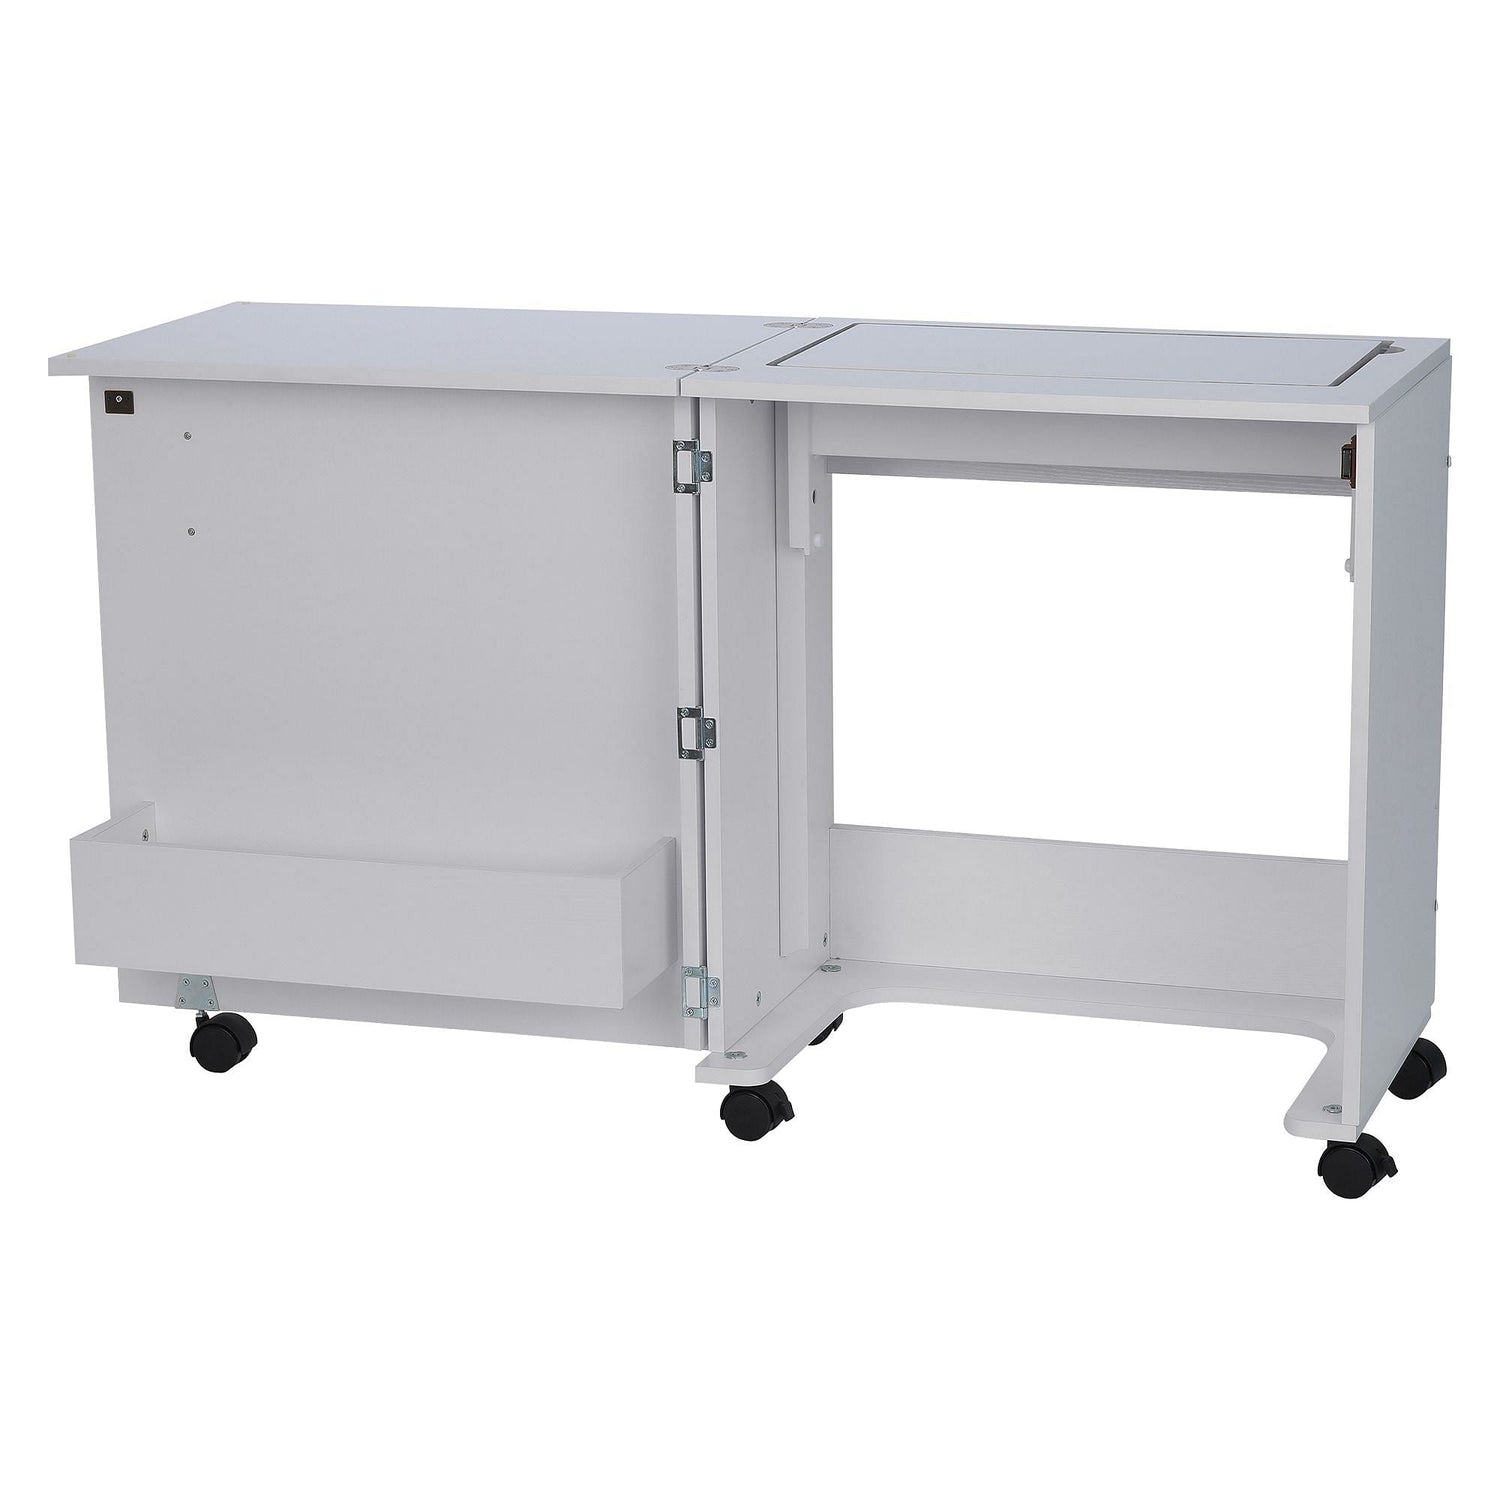 Folding Sewing Table Shelves Home Cabinet Craft Cart W/Wheels Large White